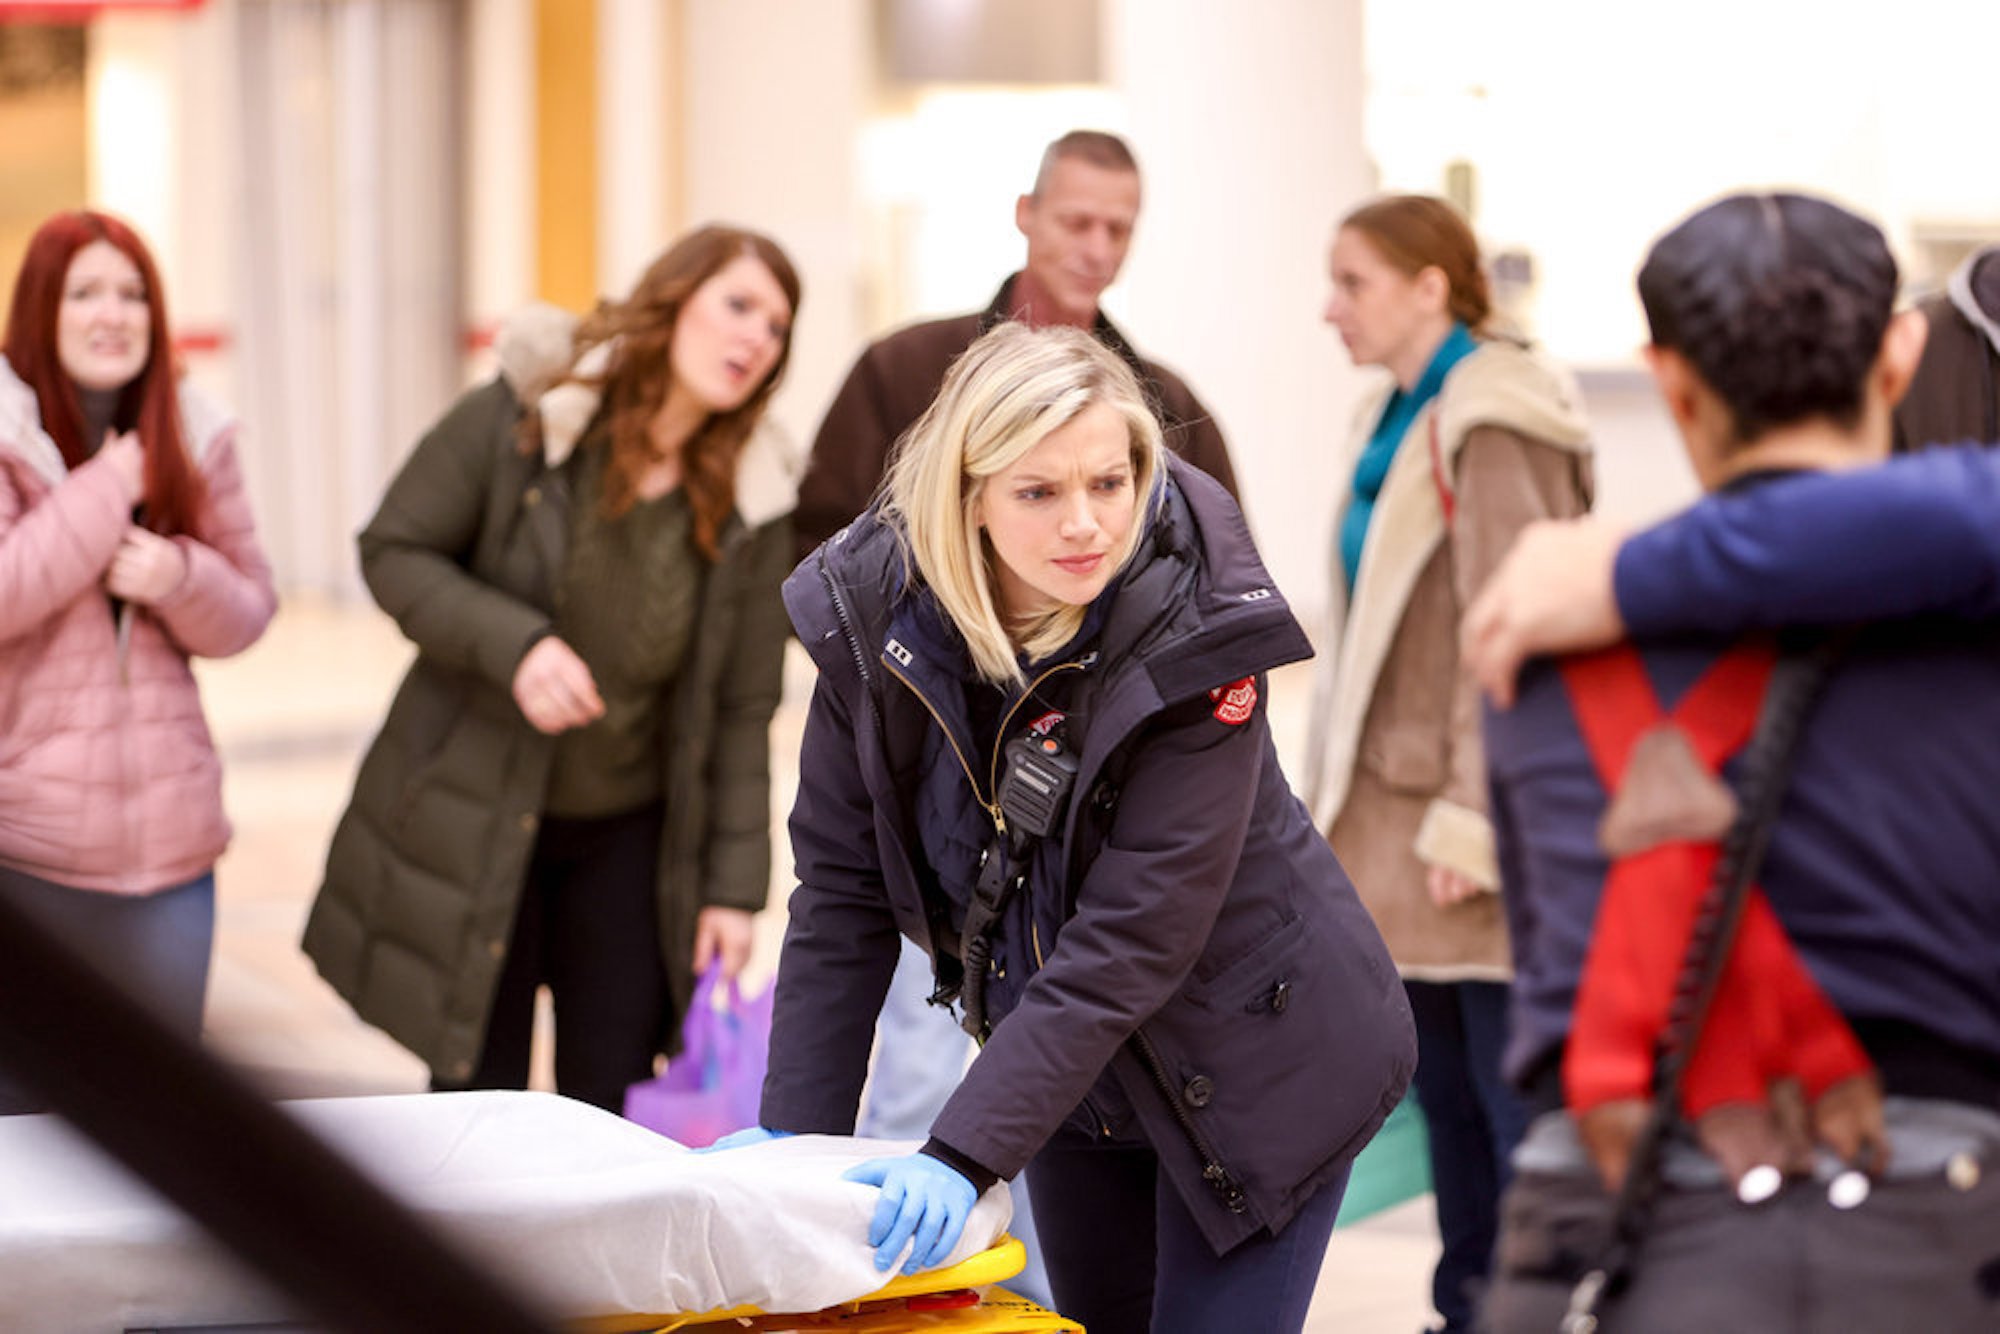 Sylvie Brett in 'Chicago Fire' Season 10 with her hands on a pillow looking concerned with others around her